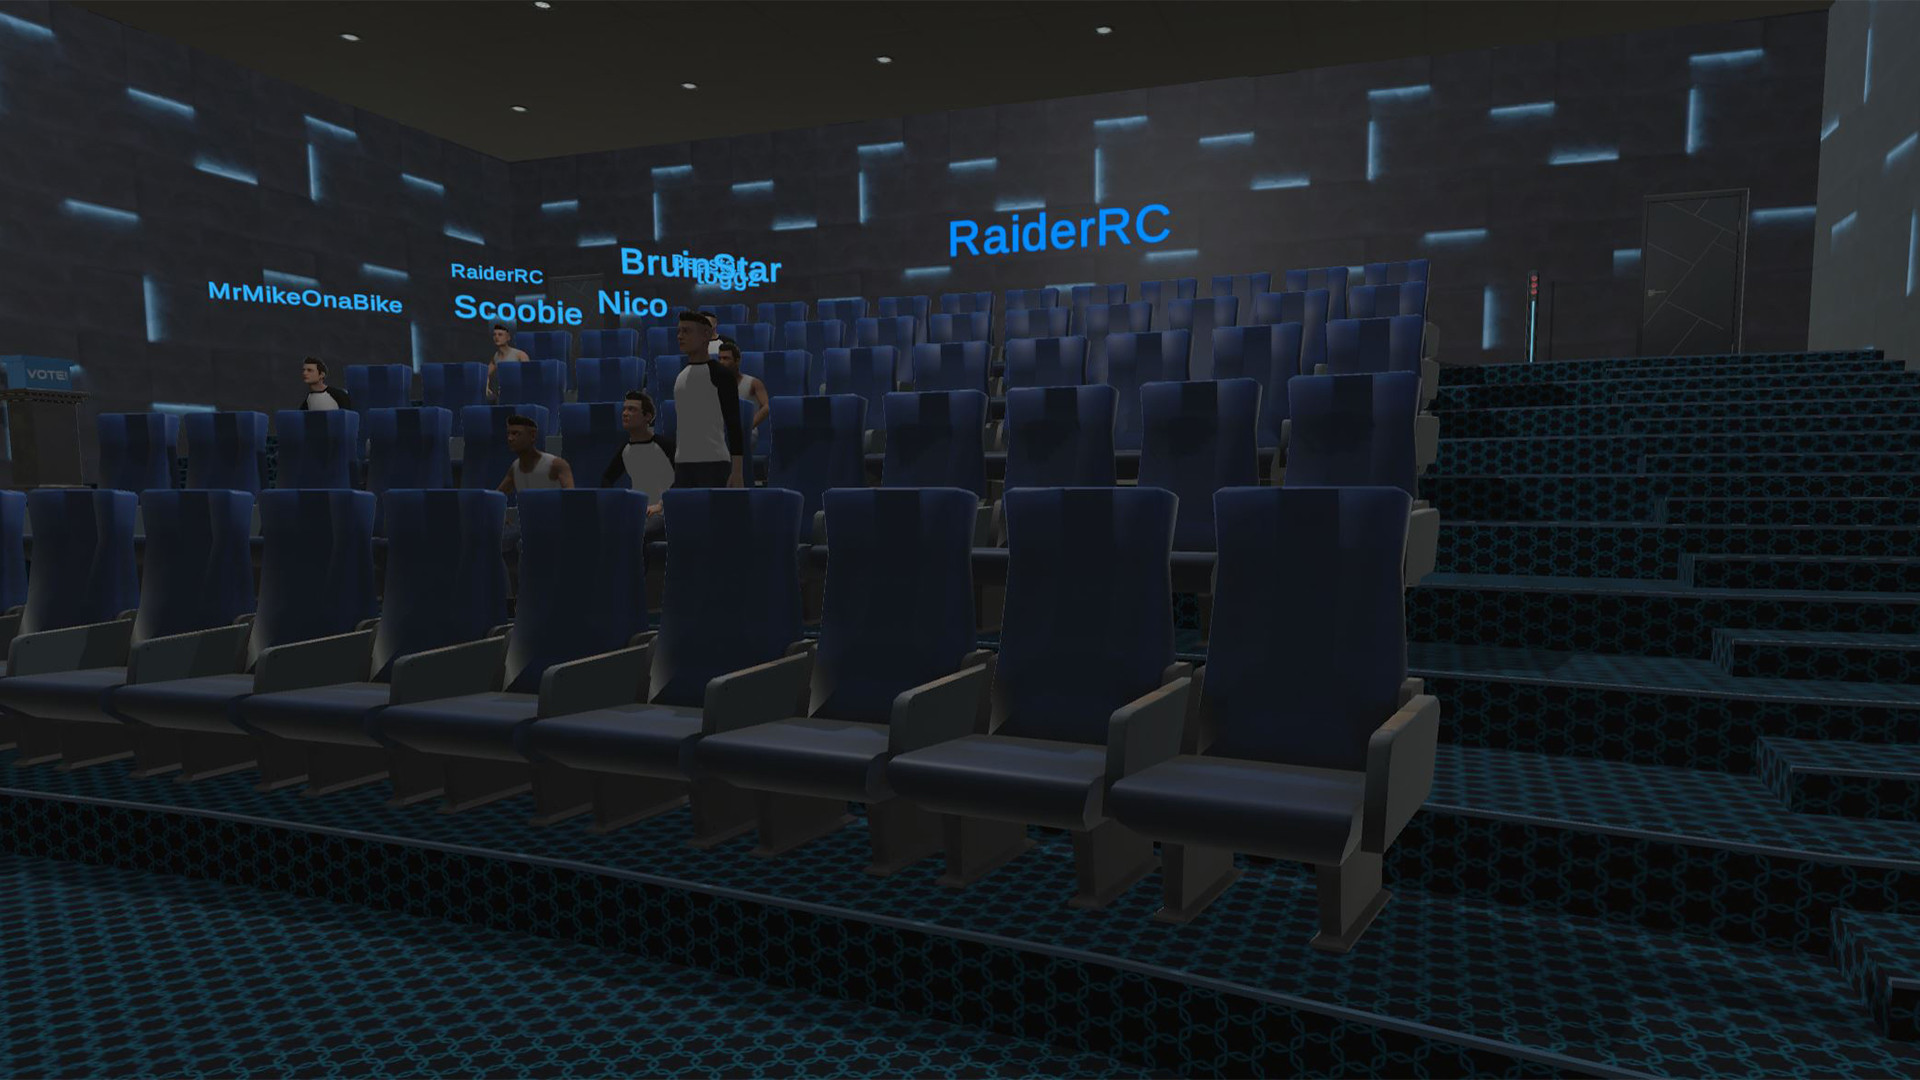 Home theater vr. The Theater игра. Кинотеатр в VRCHAT. Better Theater игра. VR театр.